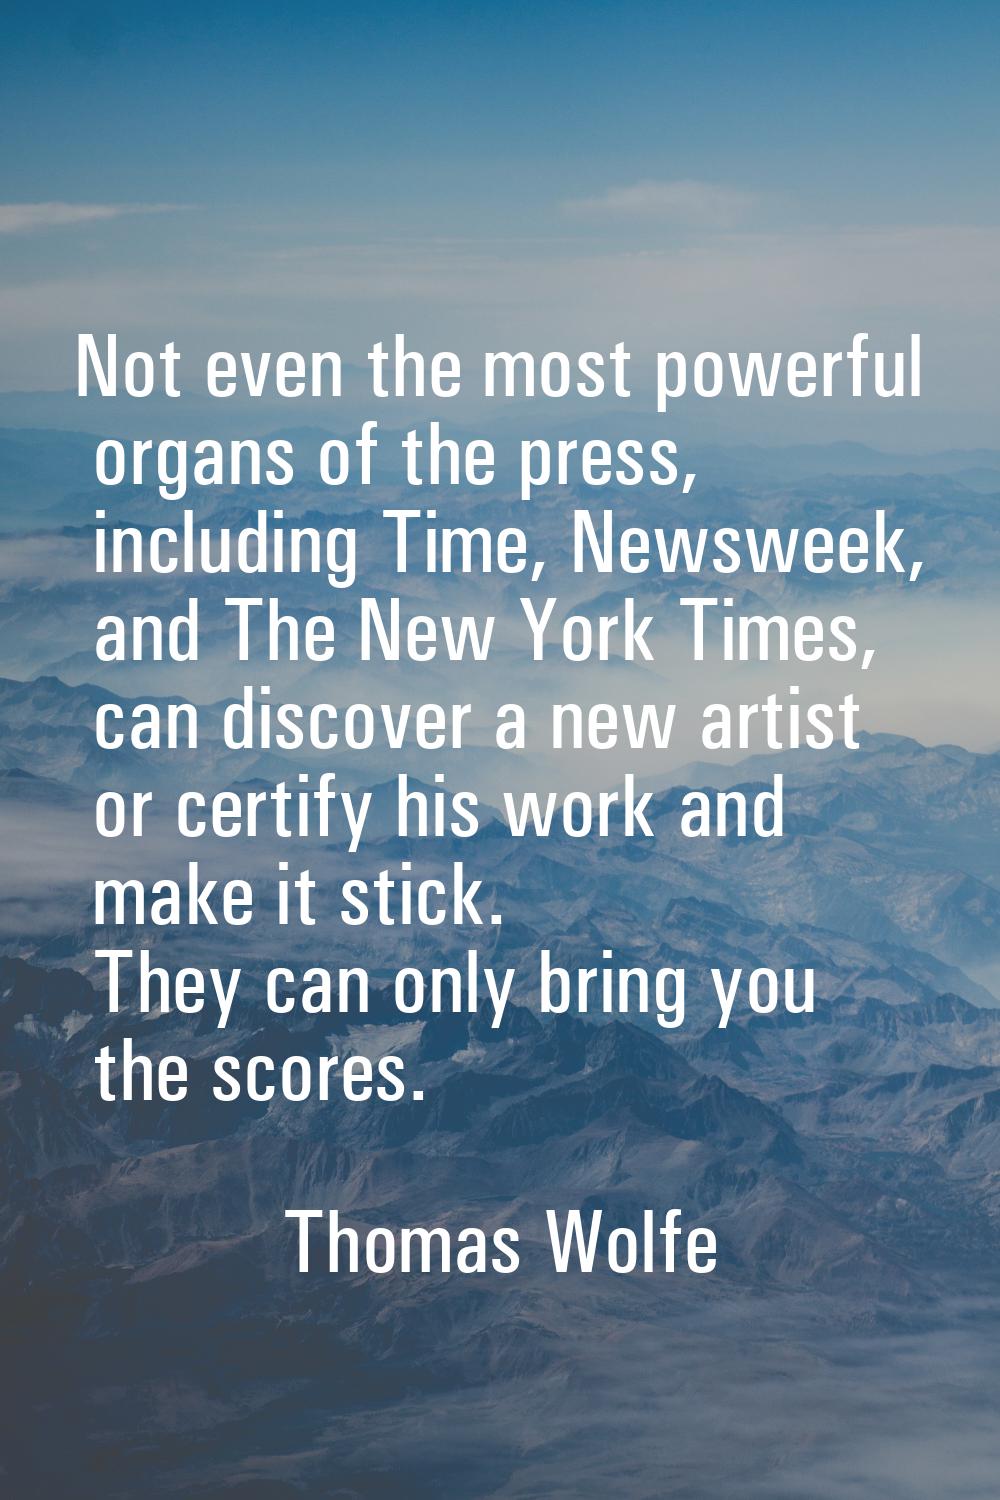 Not even the most powerful organs of the press, including Time, Newsweek, and The New York Times, c